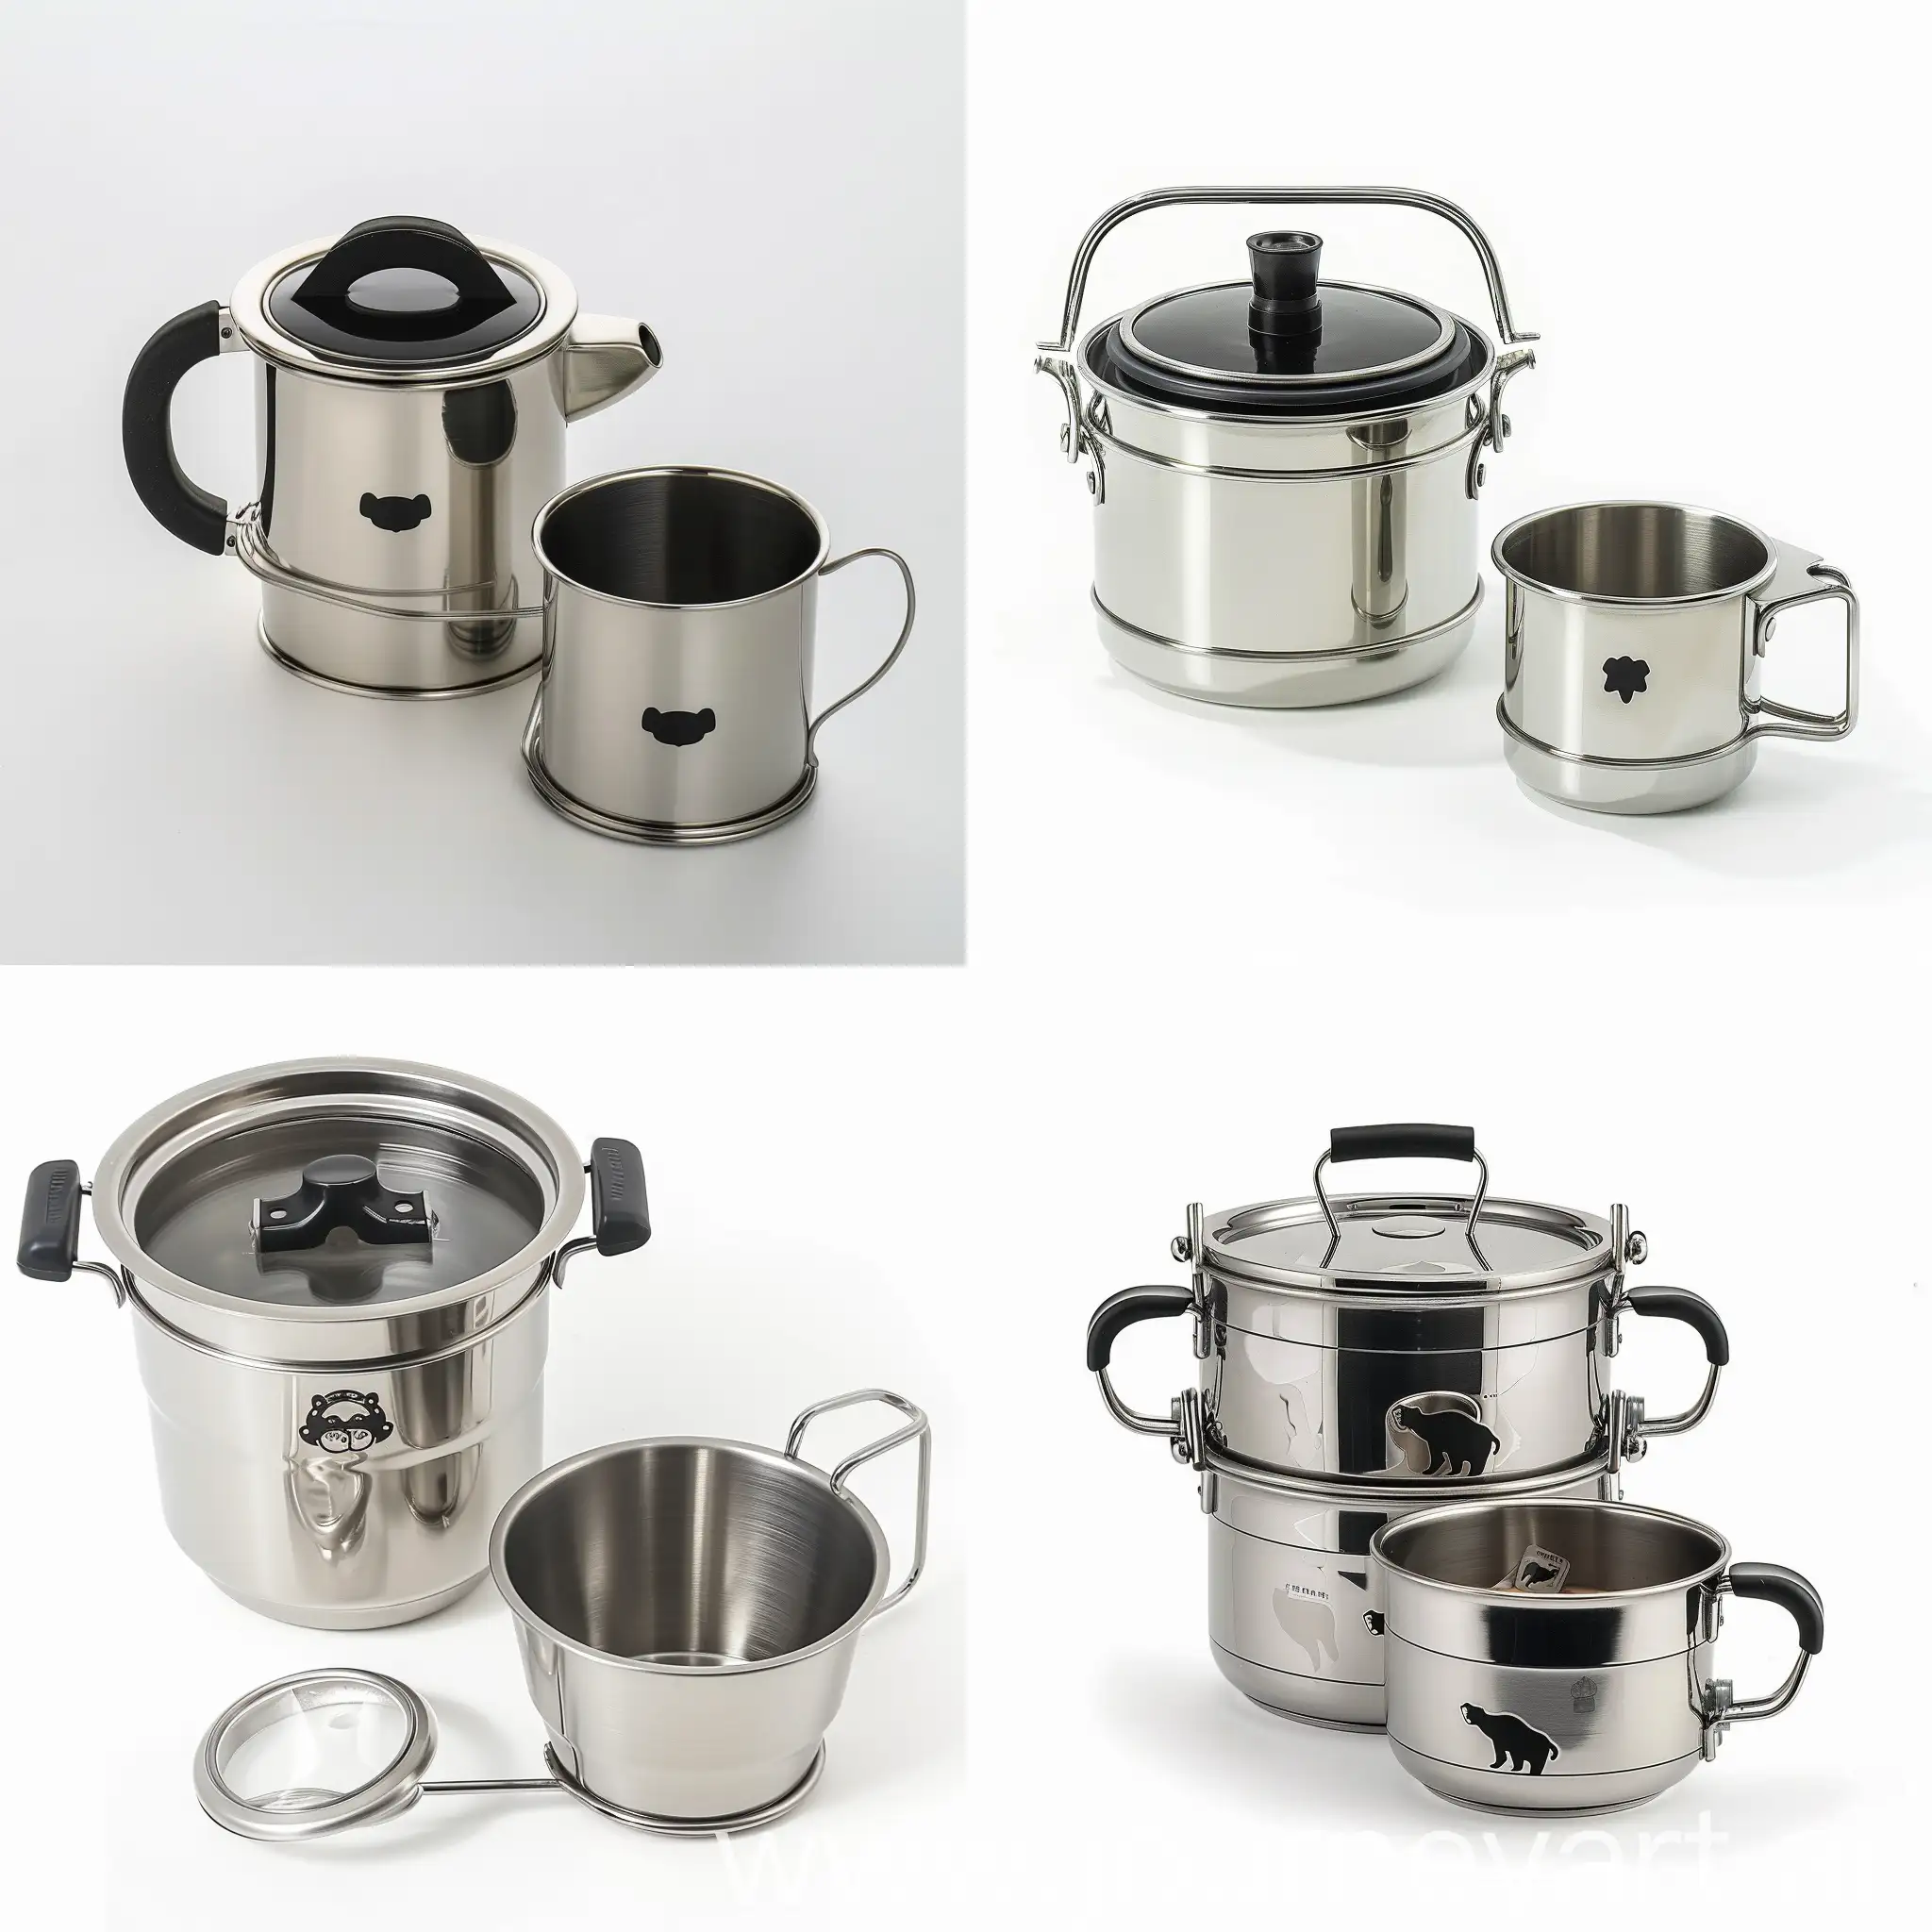 Stainless steel single-person tea set, comprising one pot and one cup, both crafted from stainless steel. The handles of the pot and cup are reminiscent of camping-style handles, foldable for compact storage. The body of the pot retains its natural stainless steel color, while the lid is made of black PP plastic material, featuring the imagery of a Formosan black bear. The overall style exudes high-end sophistication and fashion.